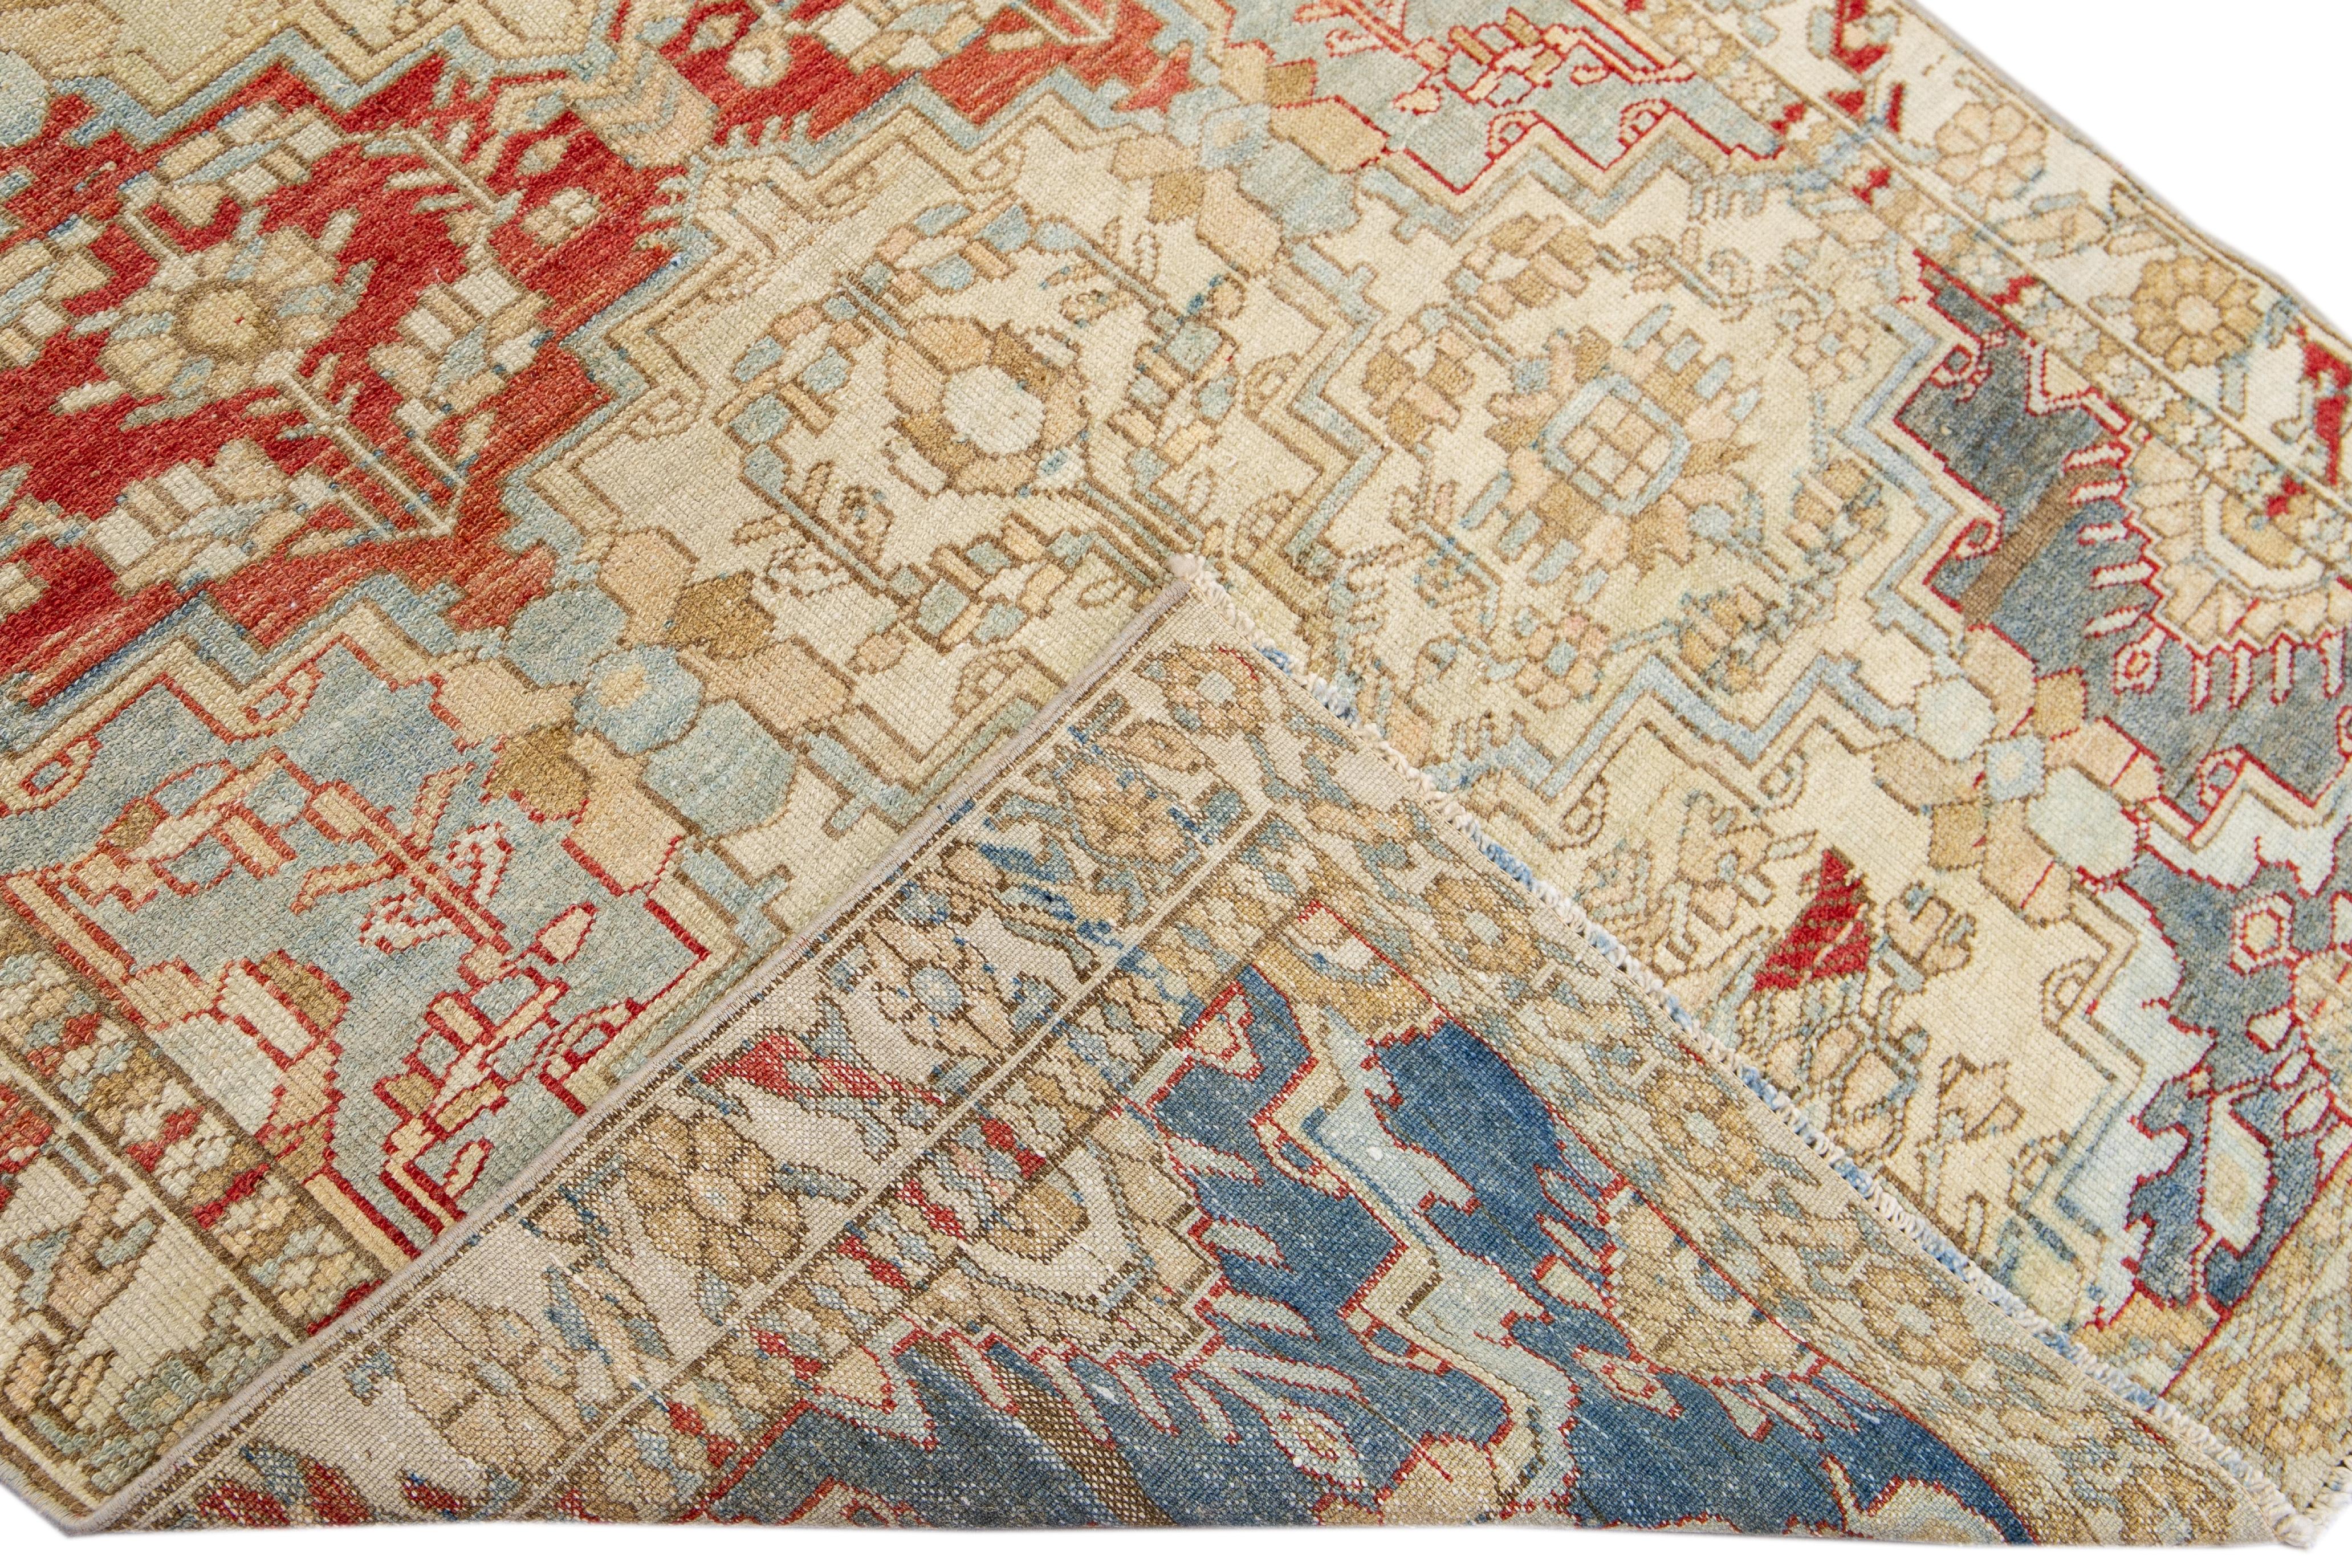 Beautiful antique Tabriz hand-knotted wool rug with a beige field. This piece has a blue and red accent in a gorgeous all-over geometric floral design.

This rug measures: 3'10